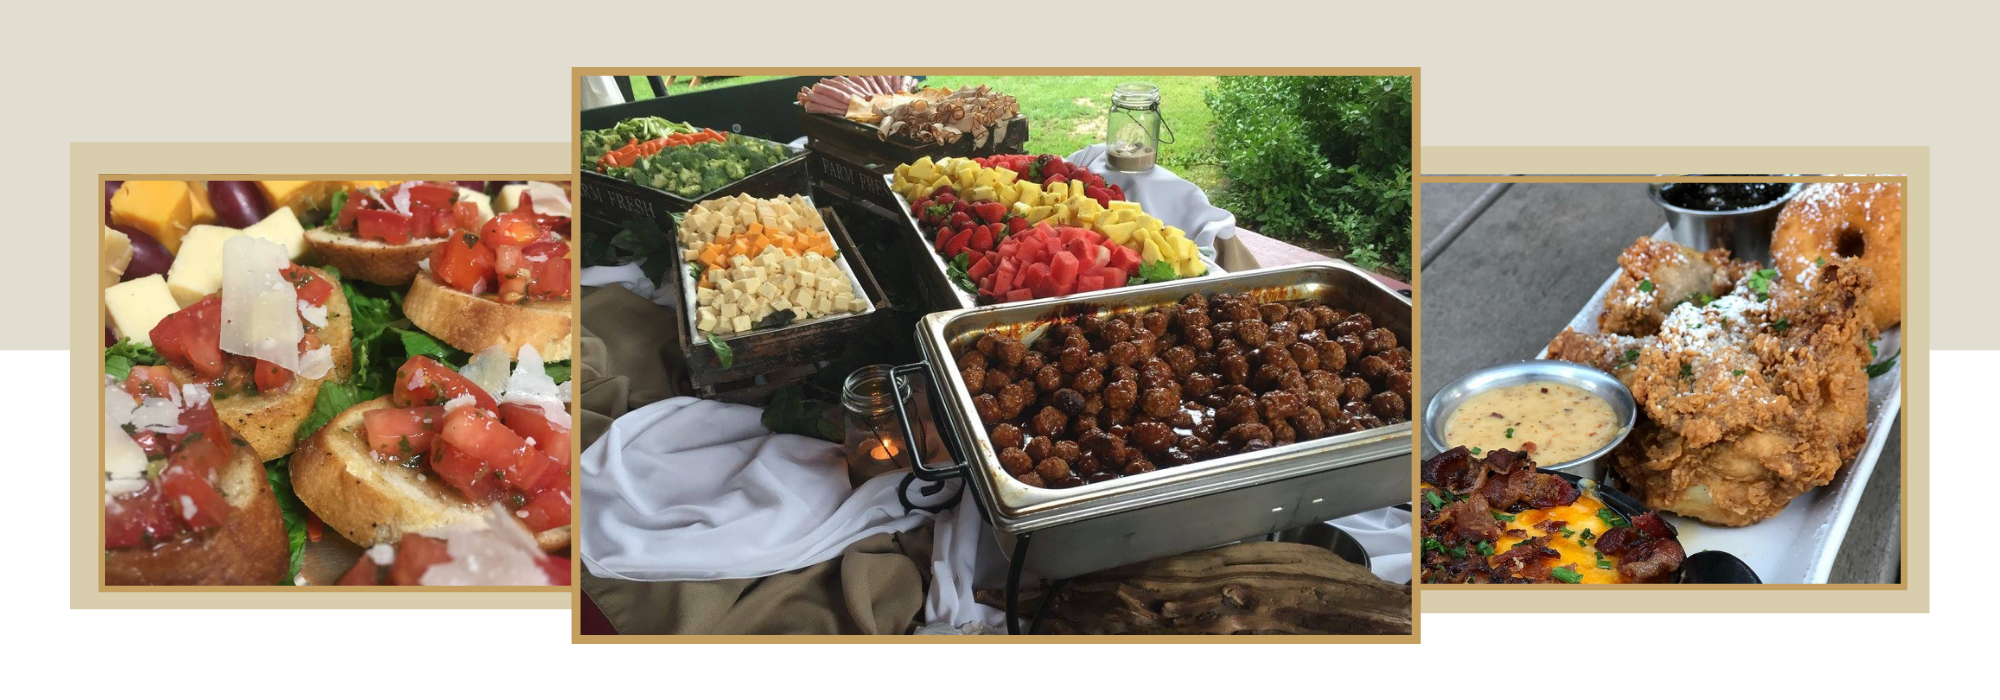 catering collage feature an appetizer tray, beautifully plated entrée and a bowl of soup 